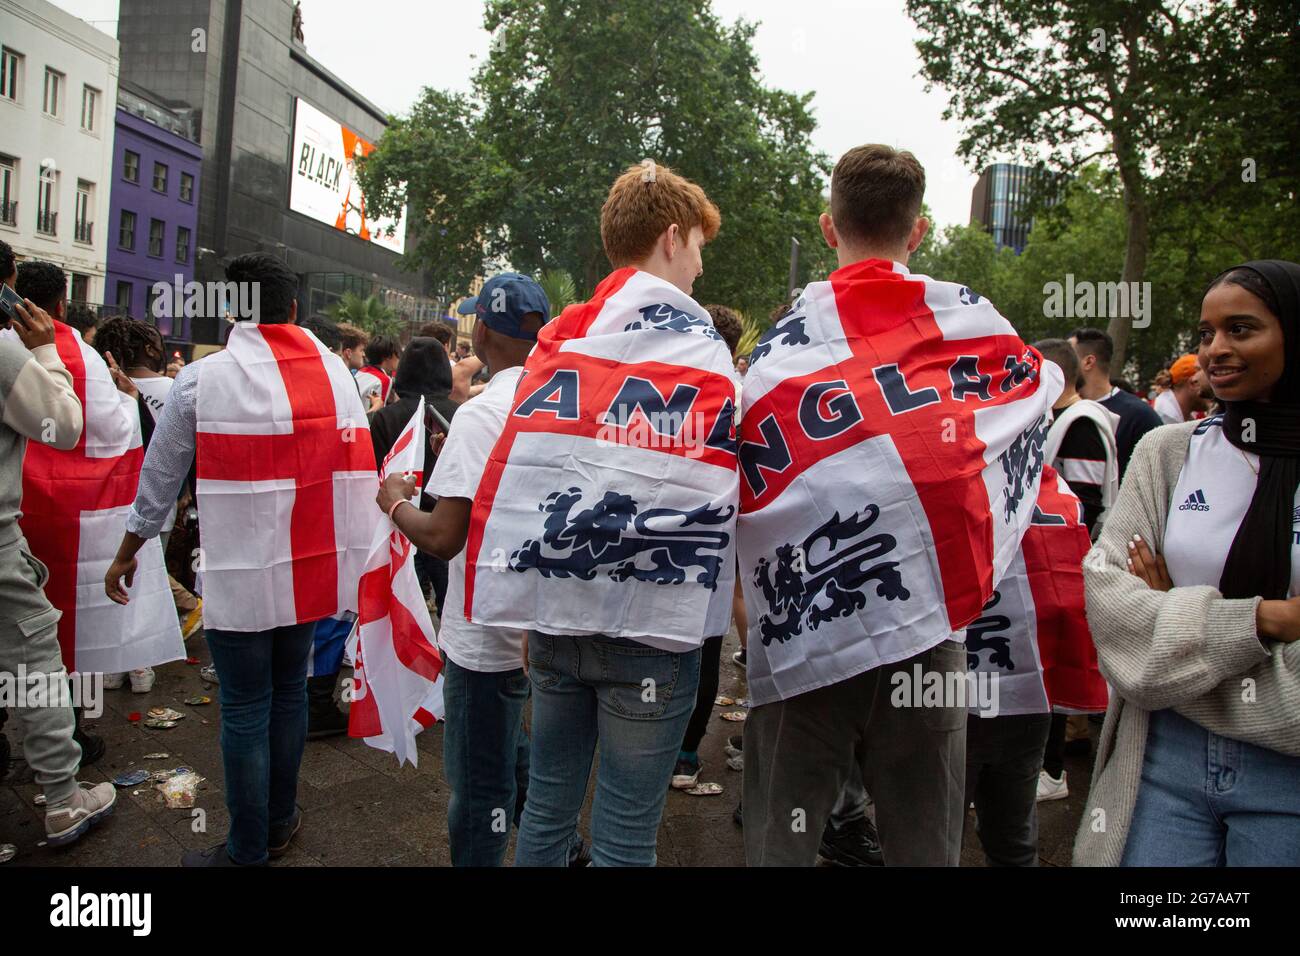 England fans congregate on Leicester Square ahead of Euro 2020 Final England vs. Italy. Stock Photo